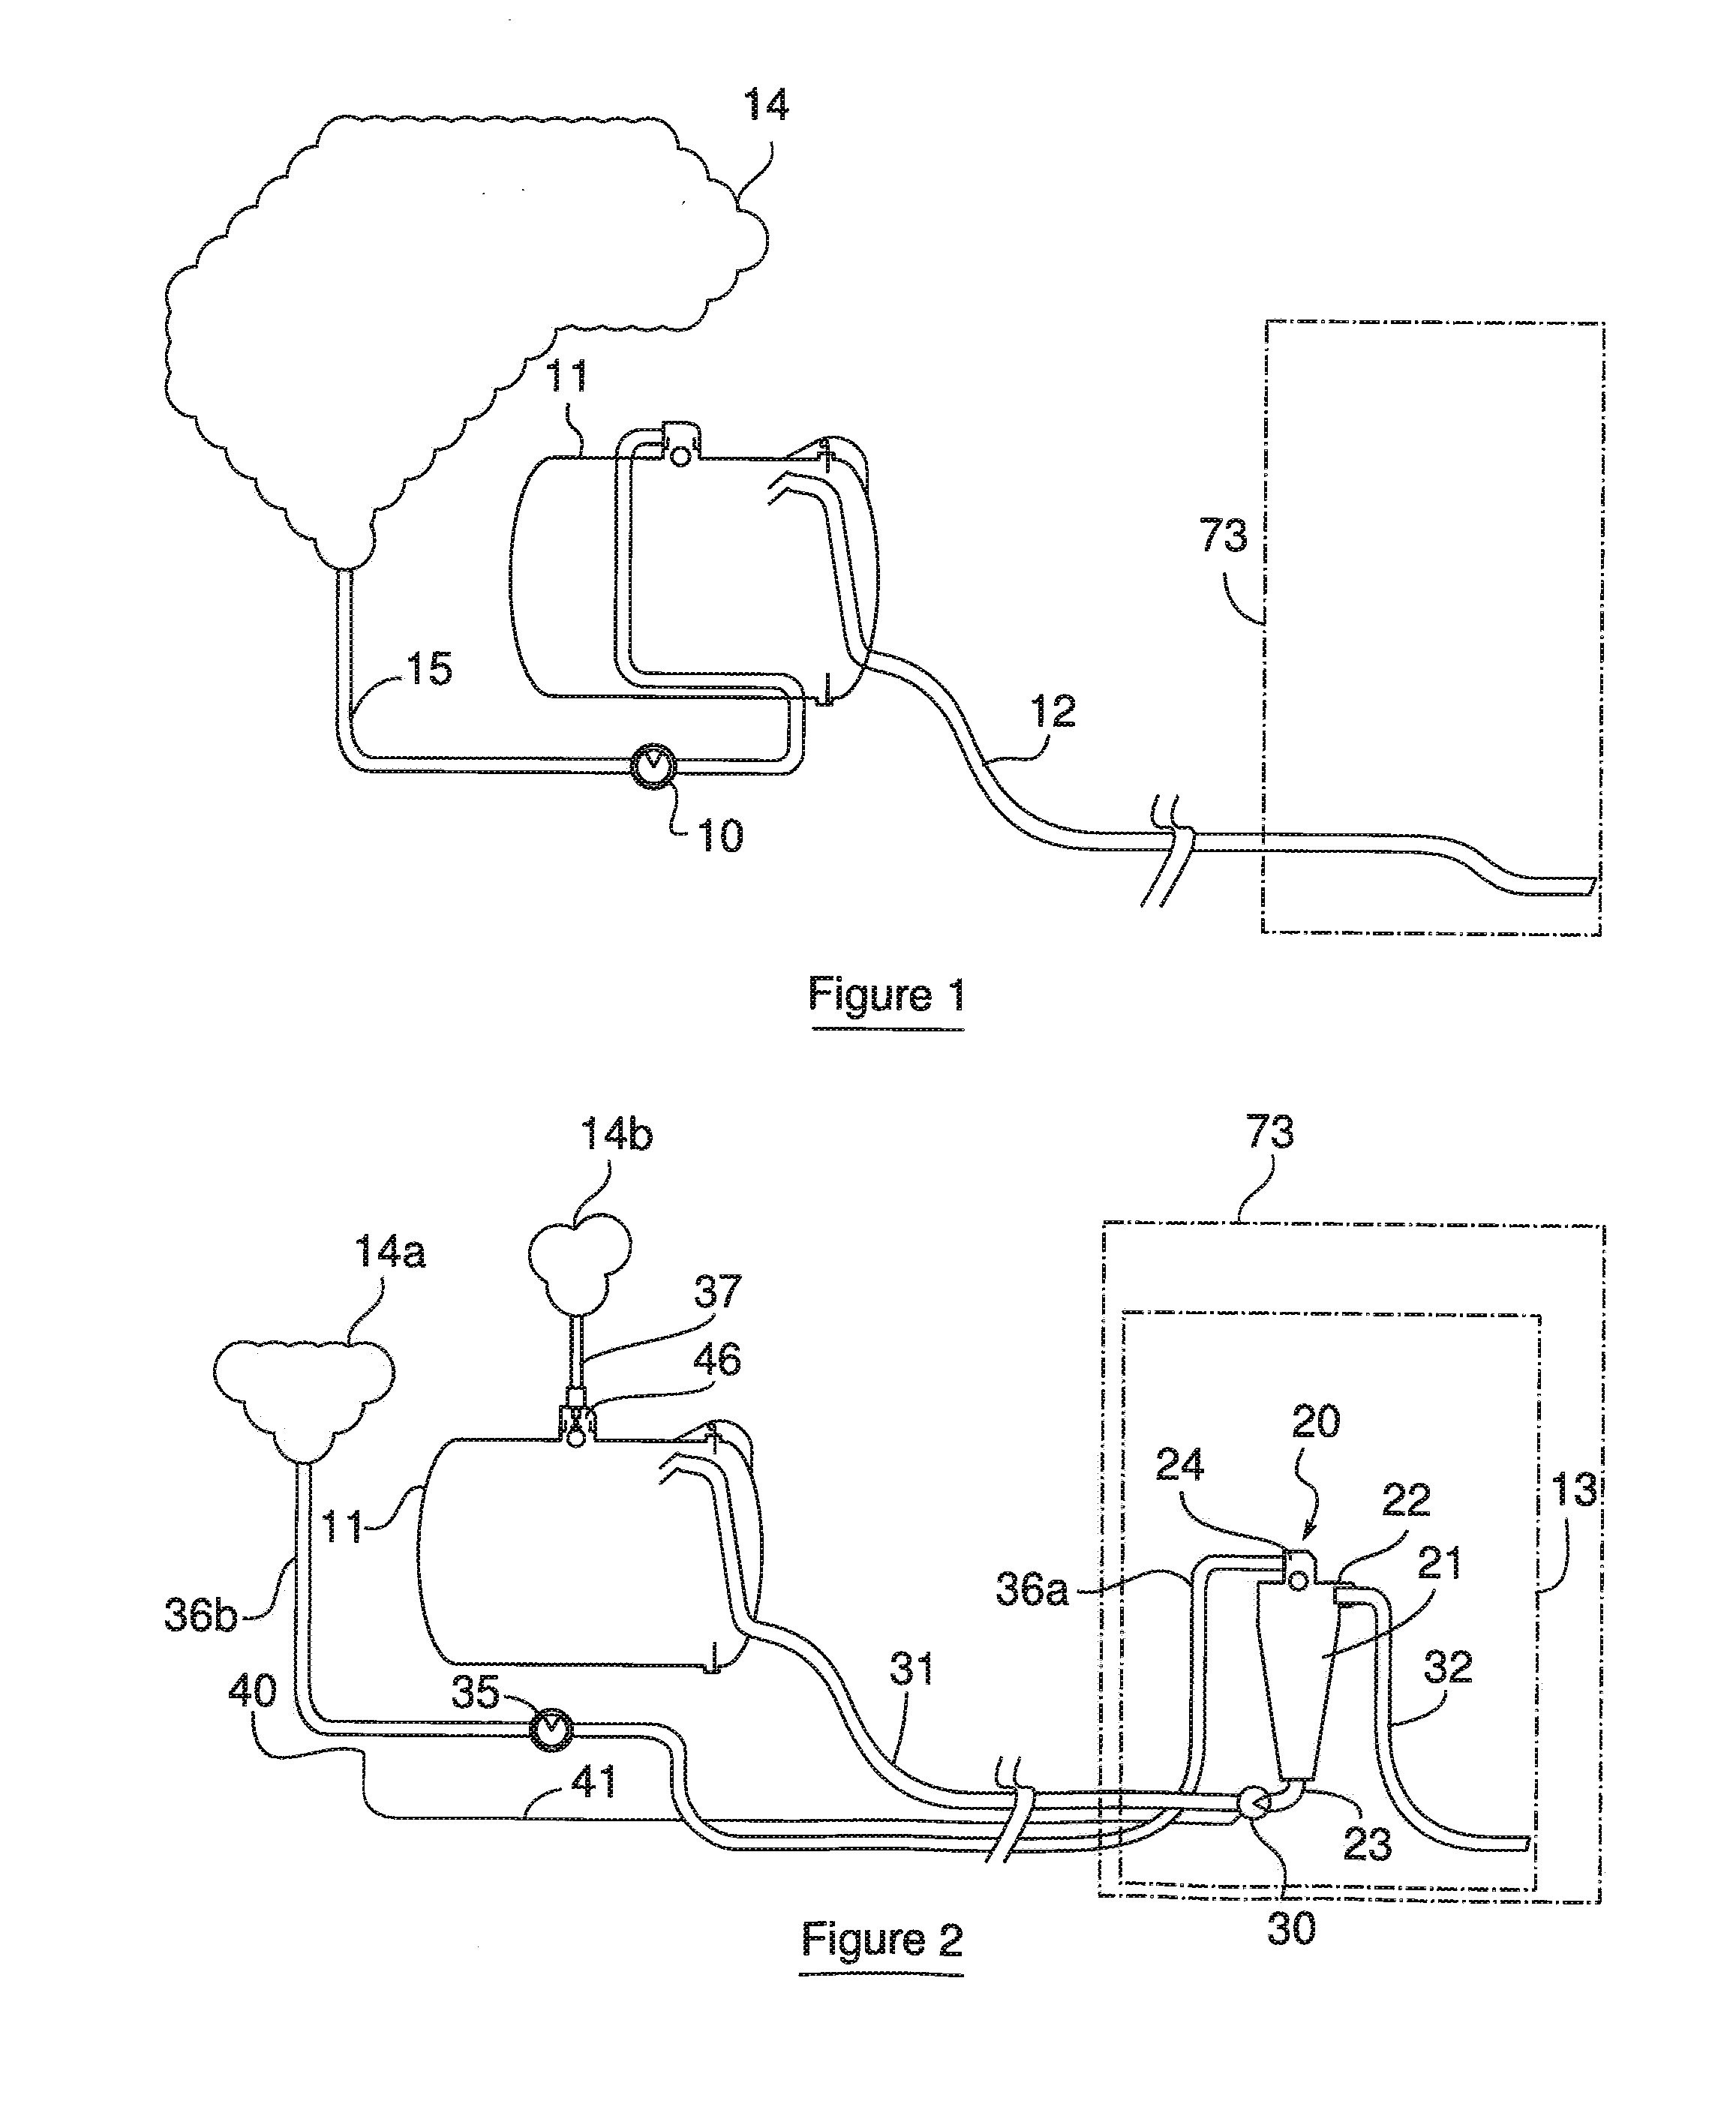 Process and unit for pumping flammable products capable of forming an explosive atmosphere